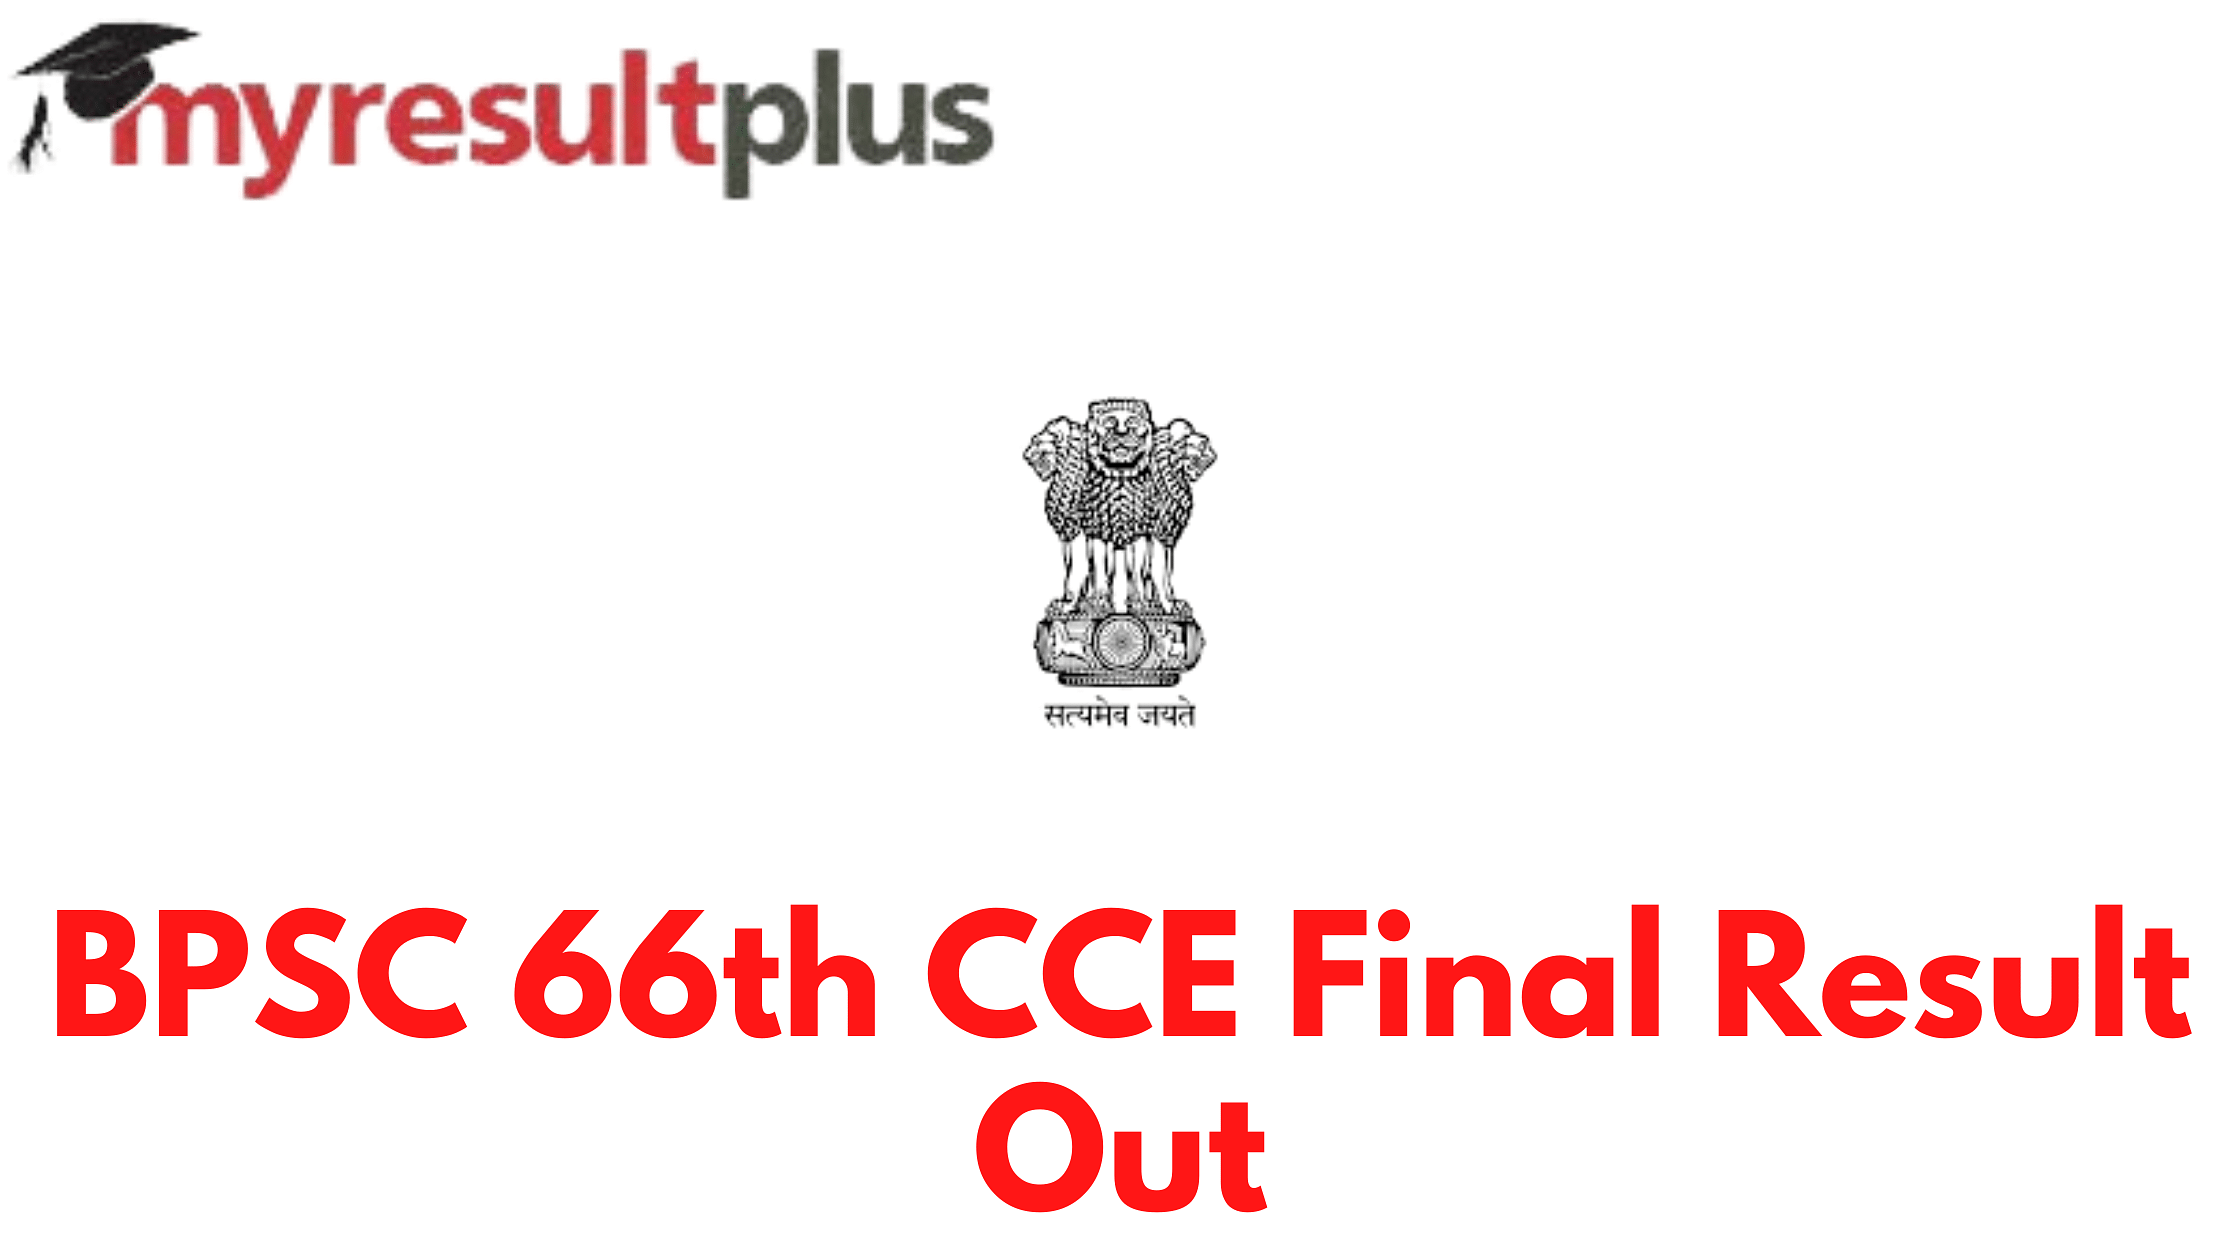 BPSC 66th CCE Final Result Announced, Know How to Check Here